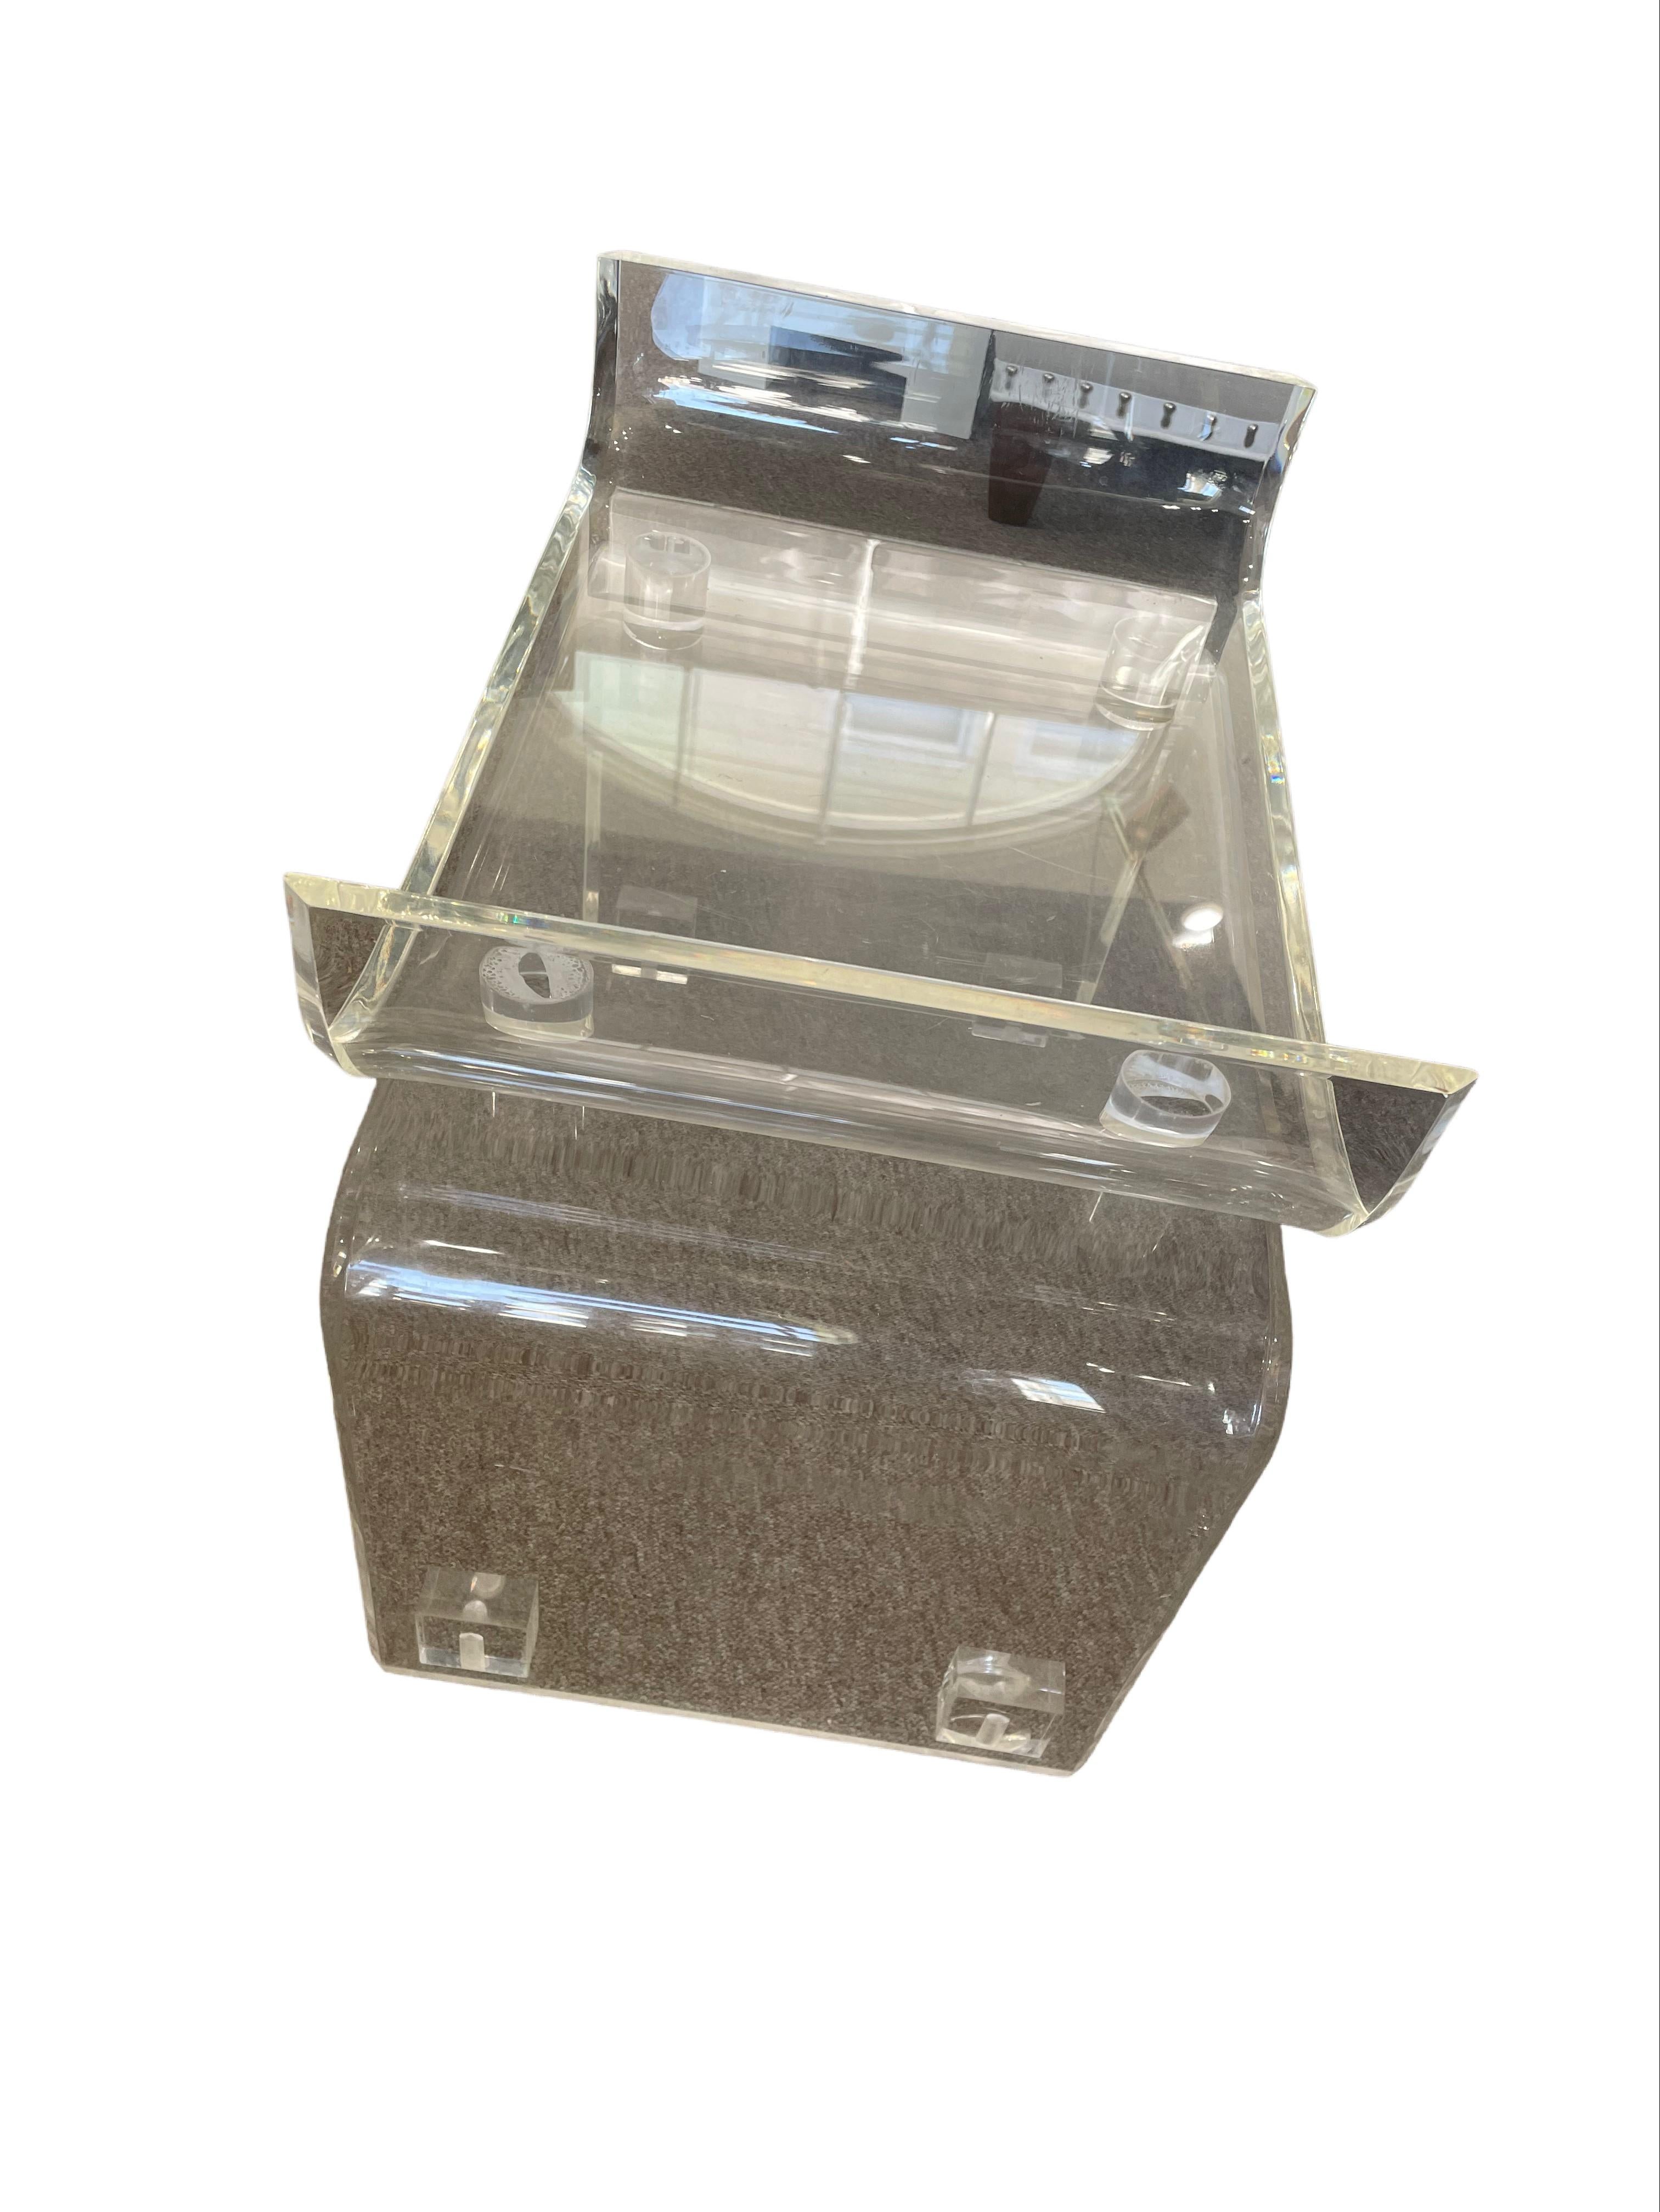 Go retro with this transparent Lucite bench. Its ¾ inch thick Lucite material makes it sturdy, and ideal as a single-seat bench, vanity seat or foot stool.